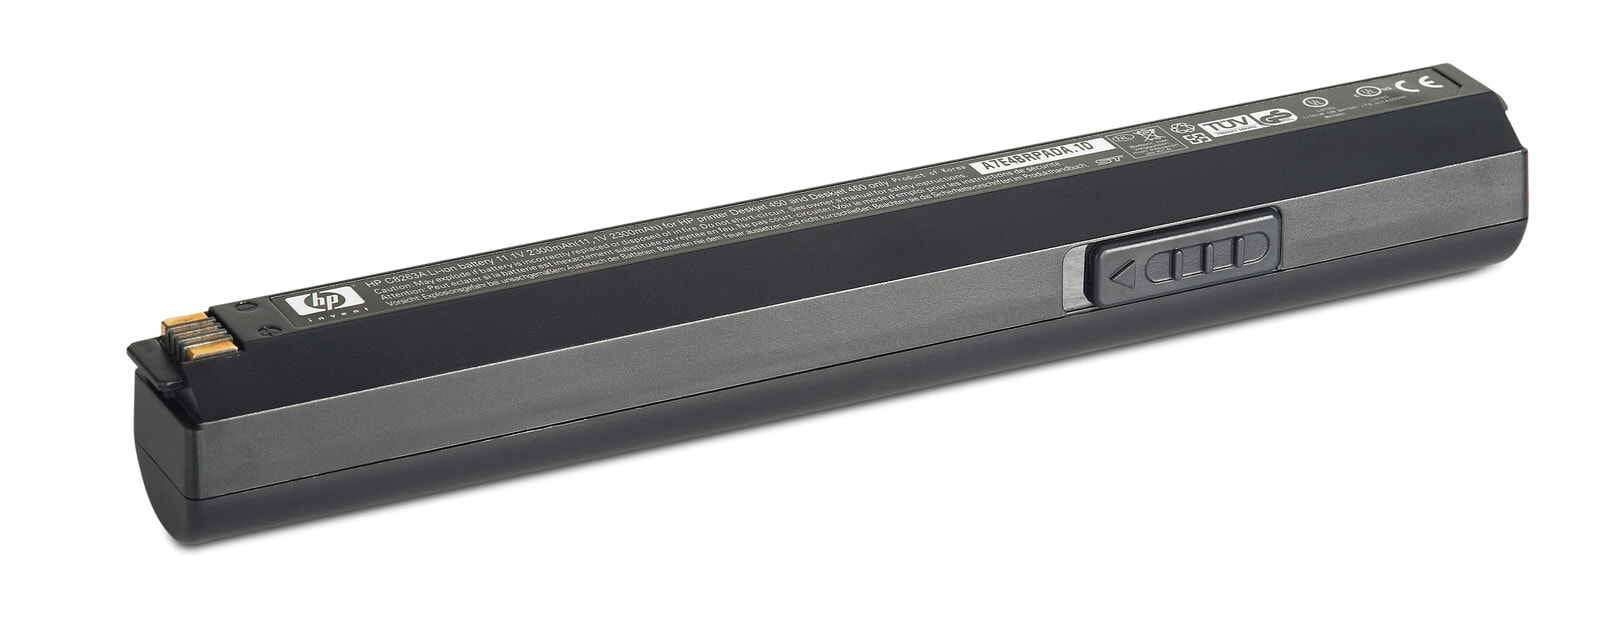 HP Lithium Ion Battery Аккумулятор 1 шт C8263A